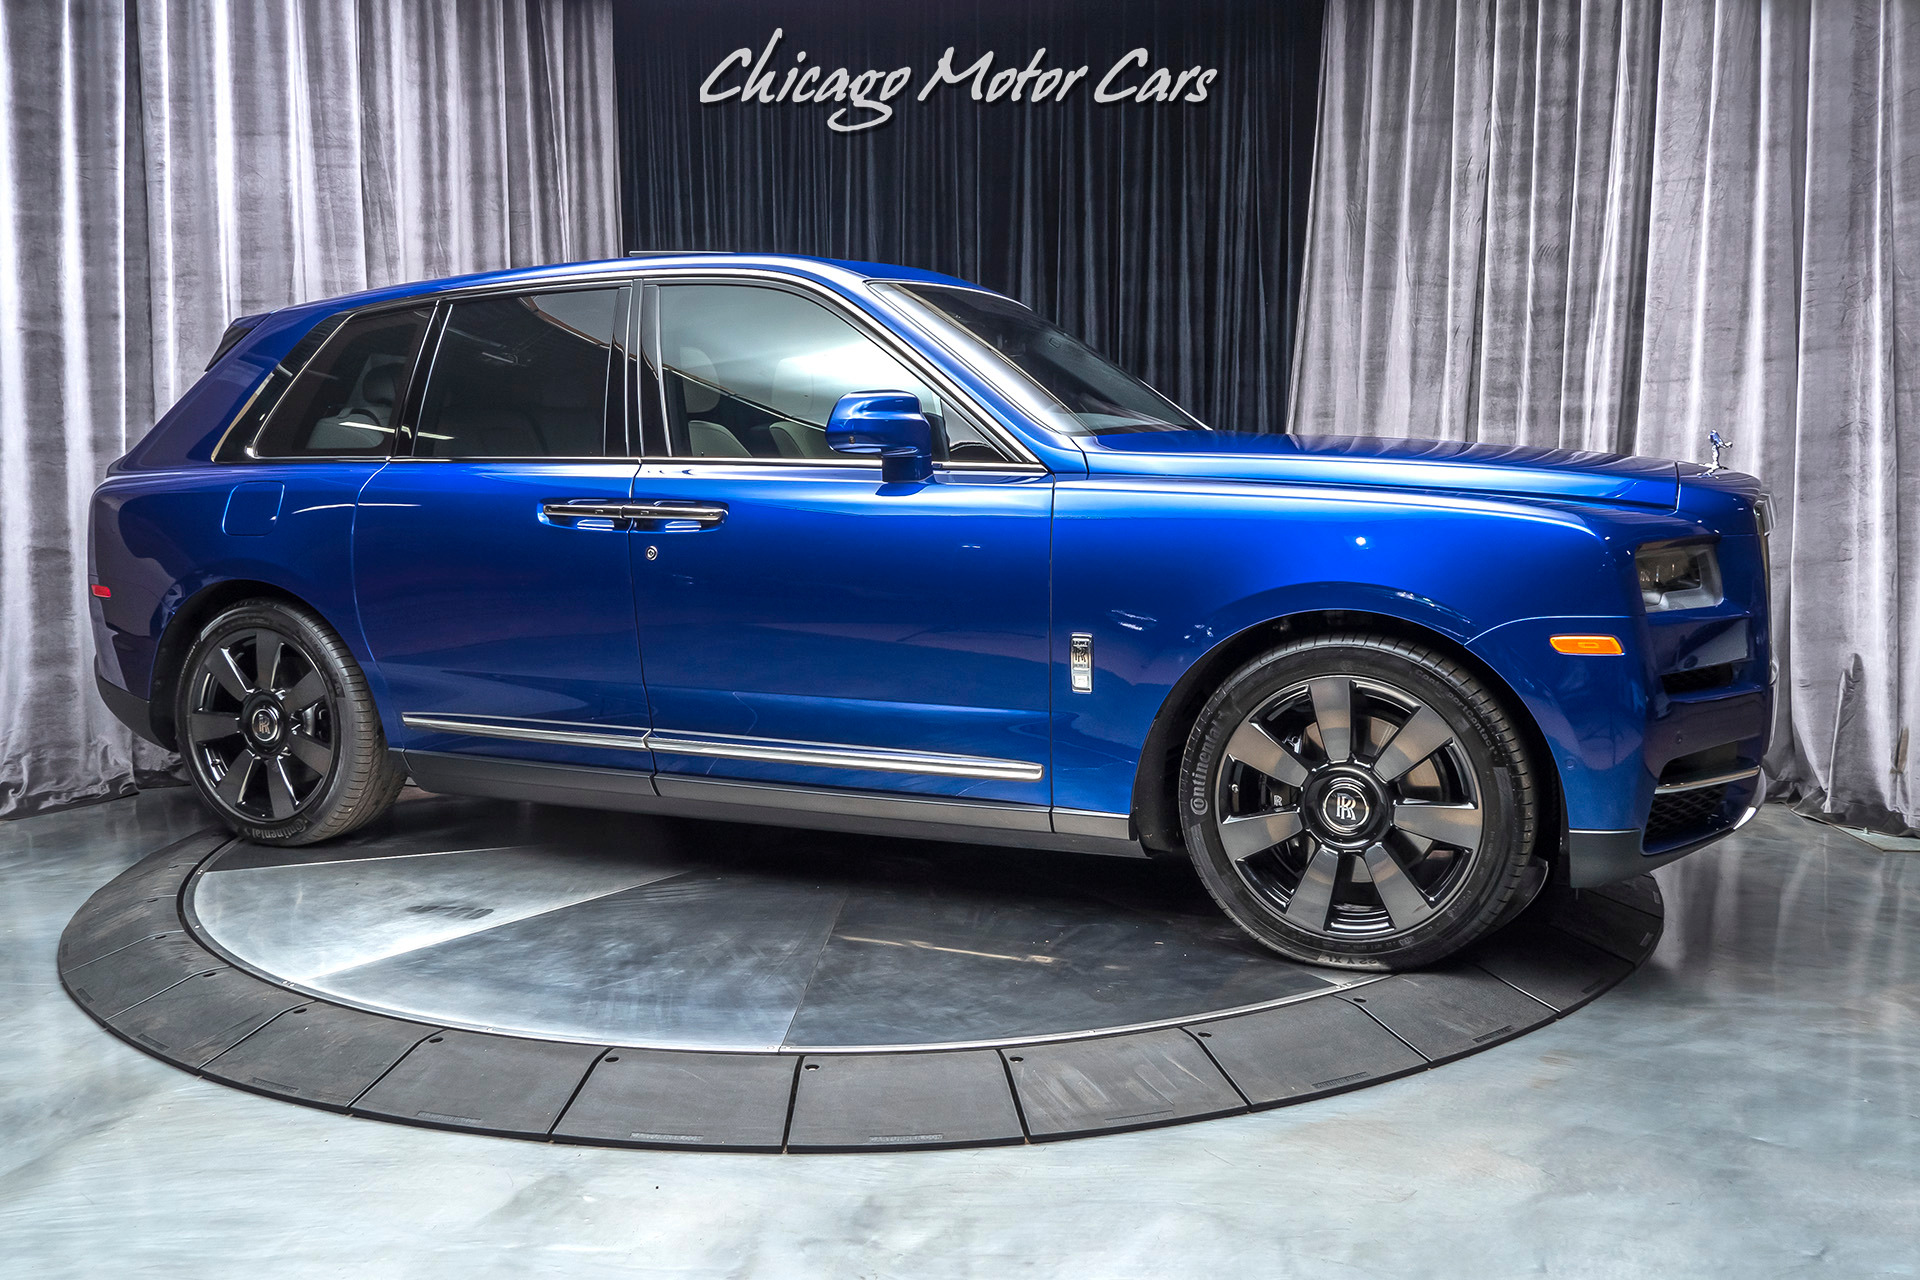 Used-2019-Rolls-Royce-Cullinan-SUV-Only-2500-Miles-RARE-Example-REAR-Seat-Entertainment